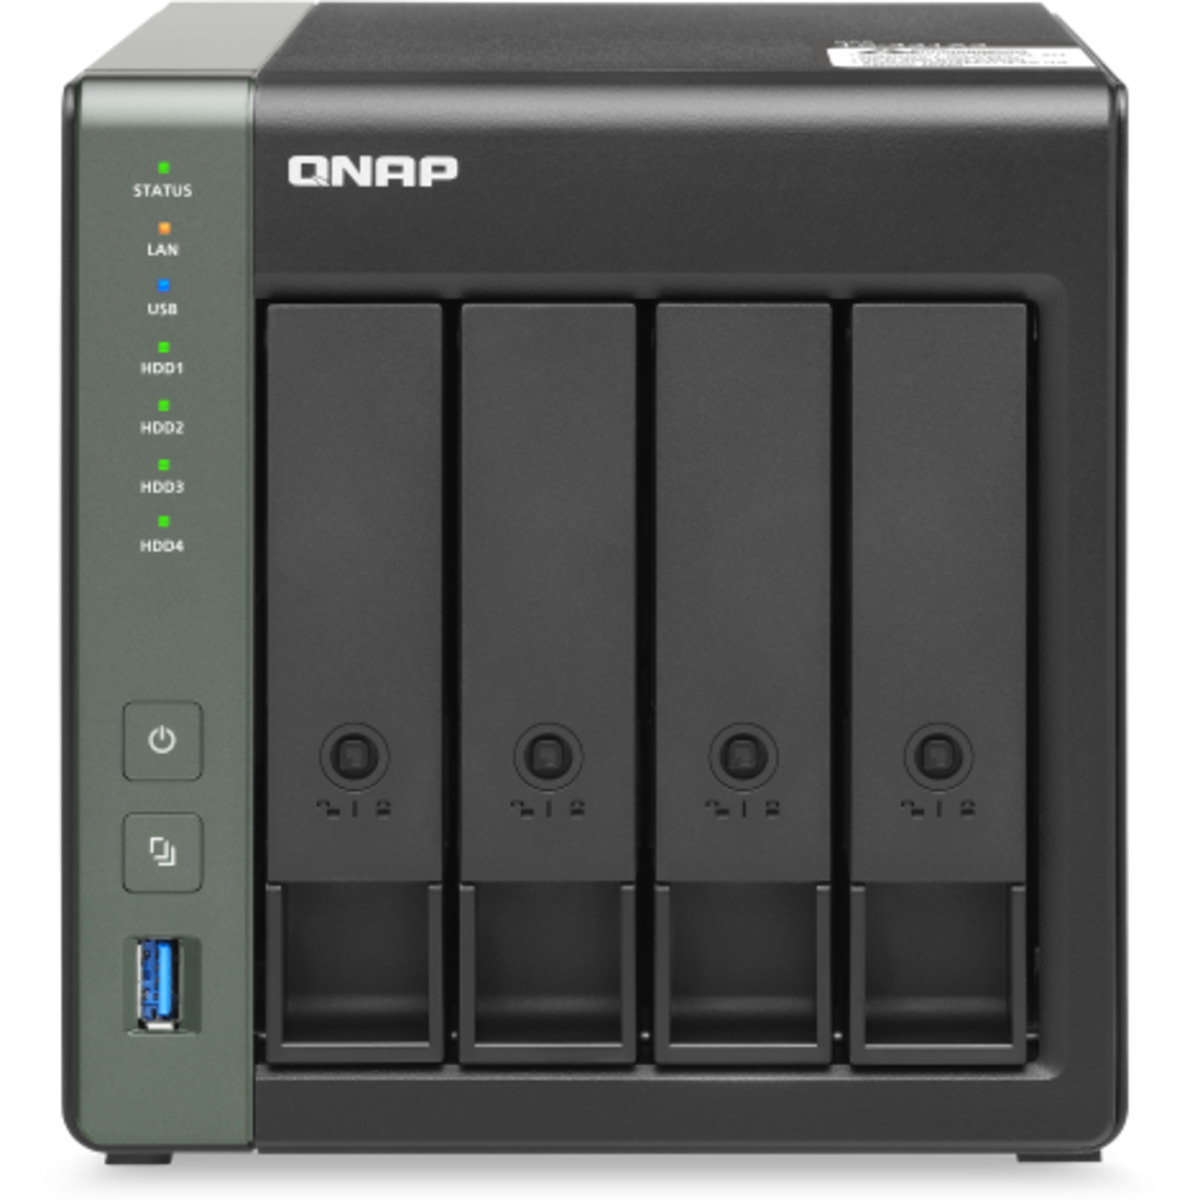 QNAP TS-431X3 30tb 4-Bay Desktop Multimedia / Power User / Business NAS - Network Attached Storage Device 3x10tb Seagate IronWolf Pro ST10000NT001 3.5 7200rpm SATA 6Gb/s HDD NAS Class Drives Installed - Burn-In Tested - ON SALE - FREE RAM UPGRADE TS-431X3